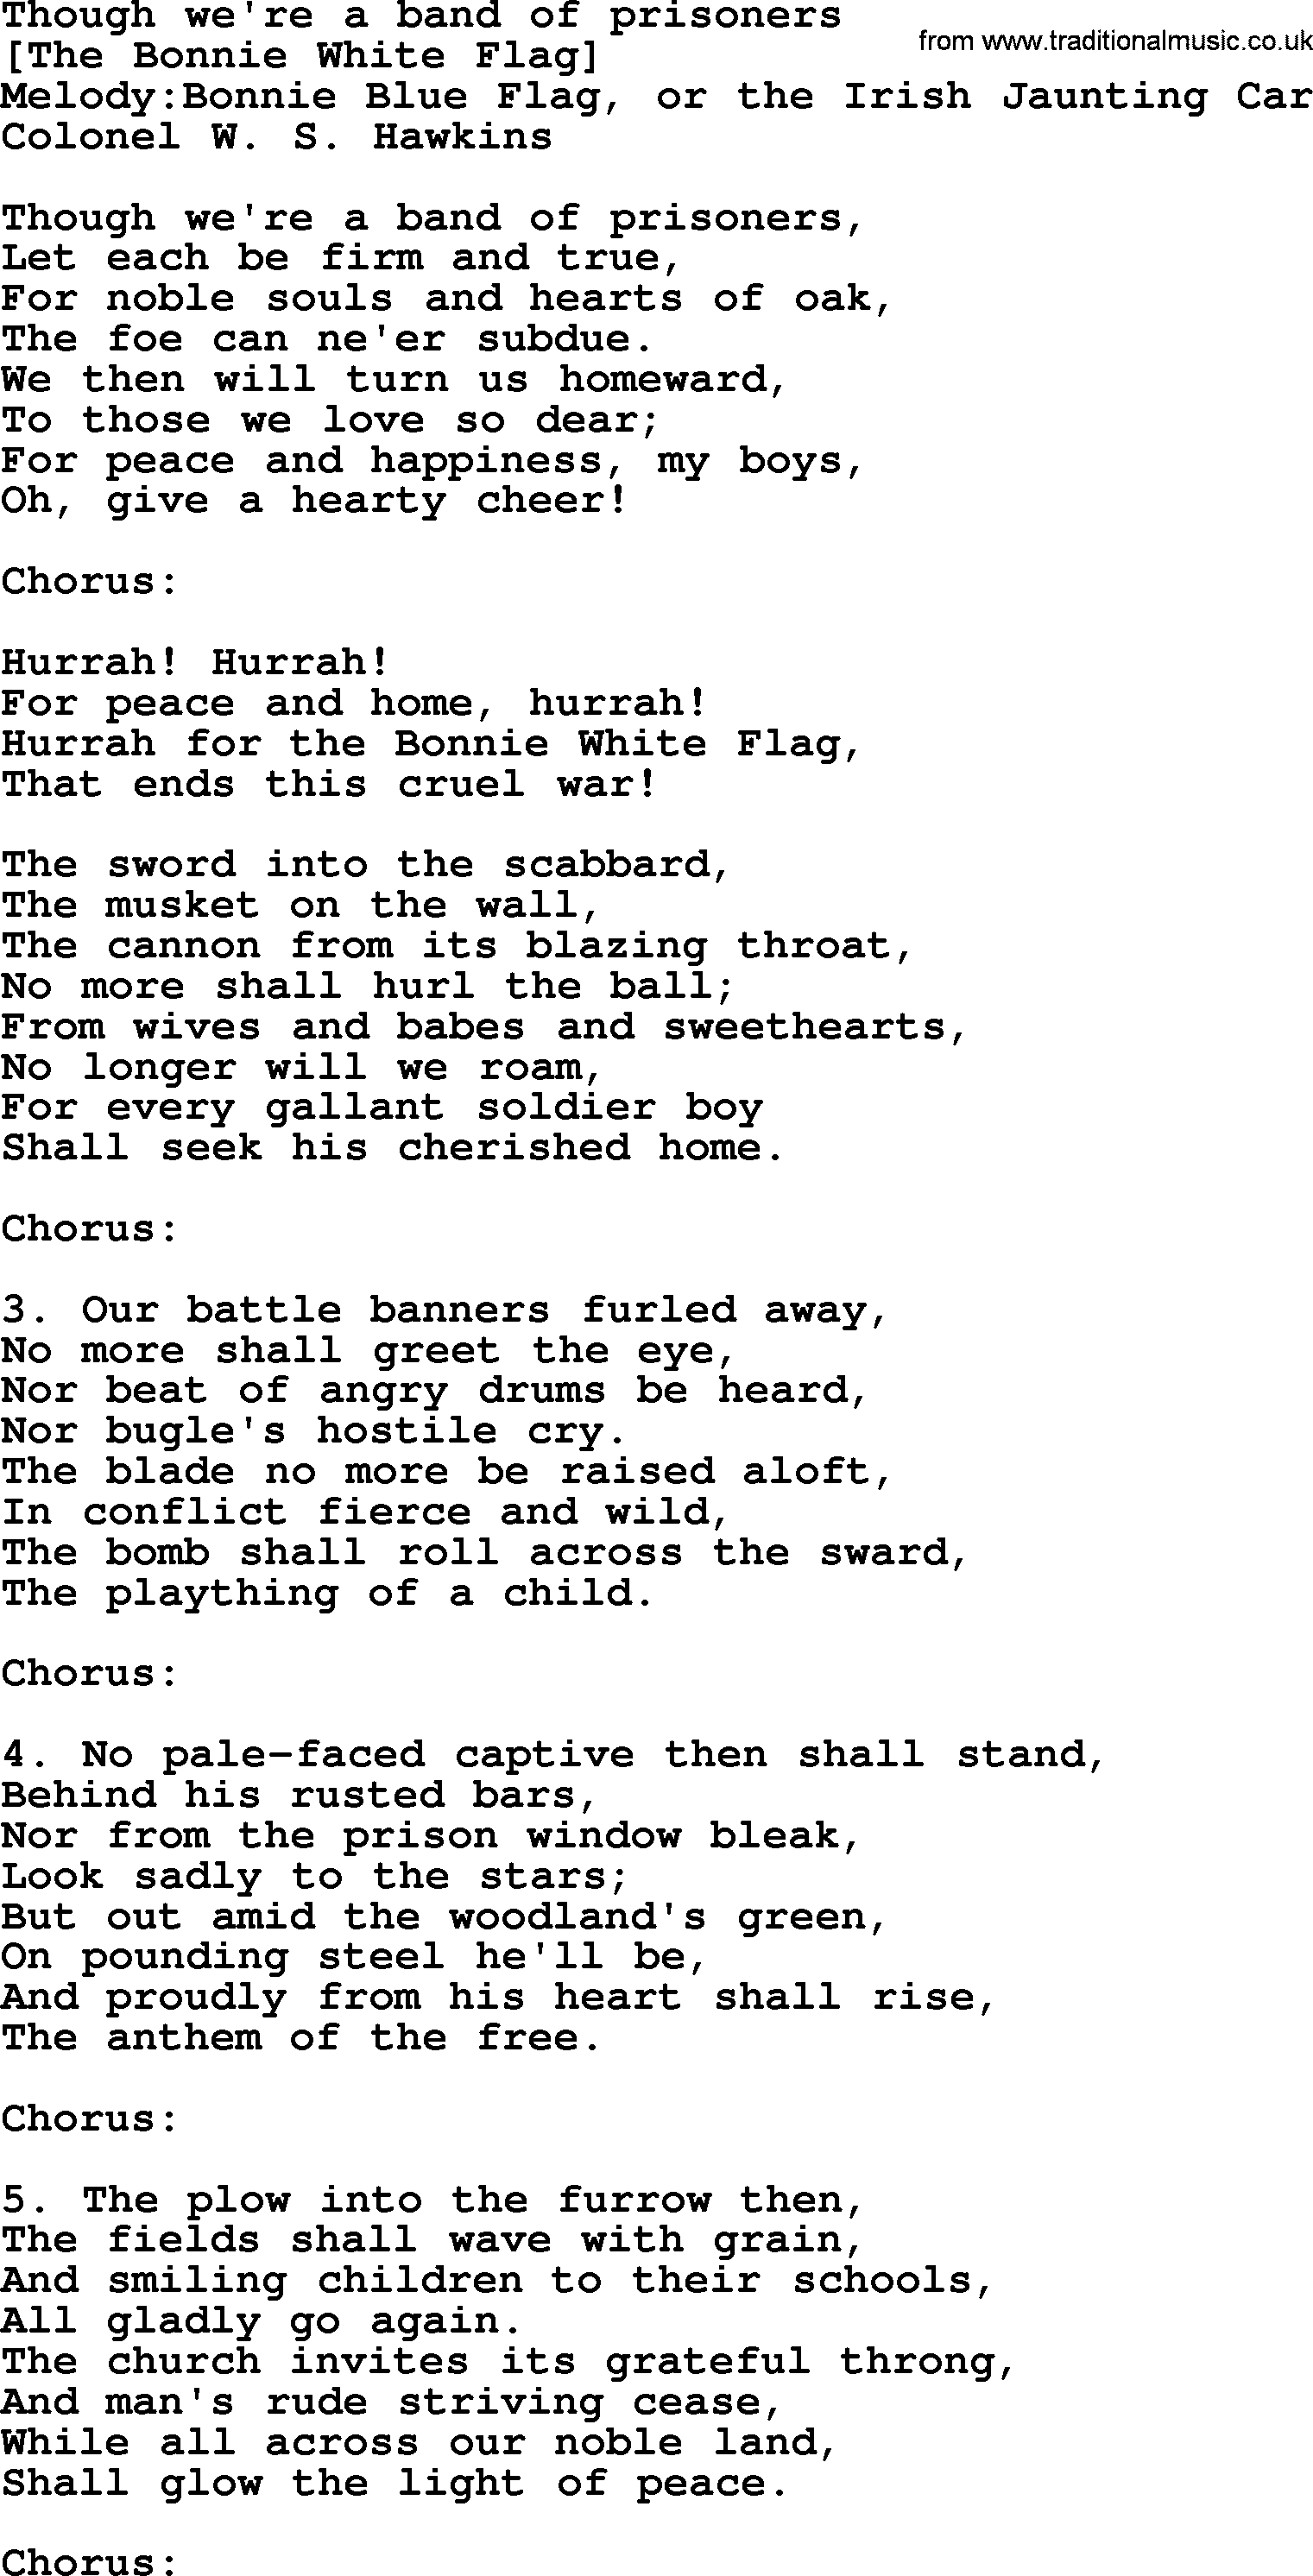 Old American Song: Though We're A Band Of Prisoners, lyrics